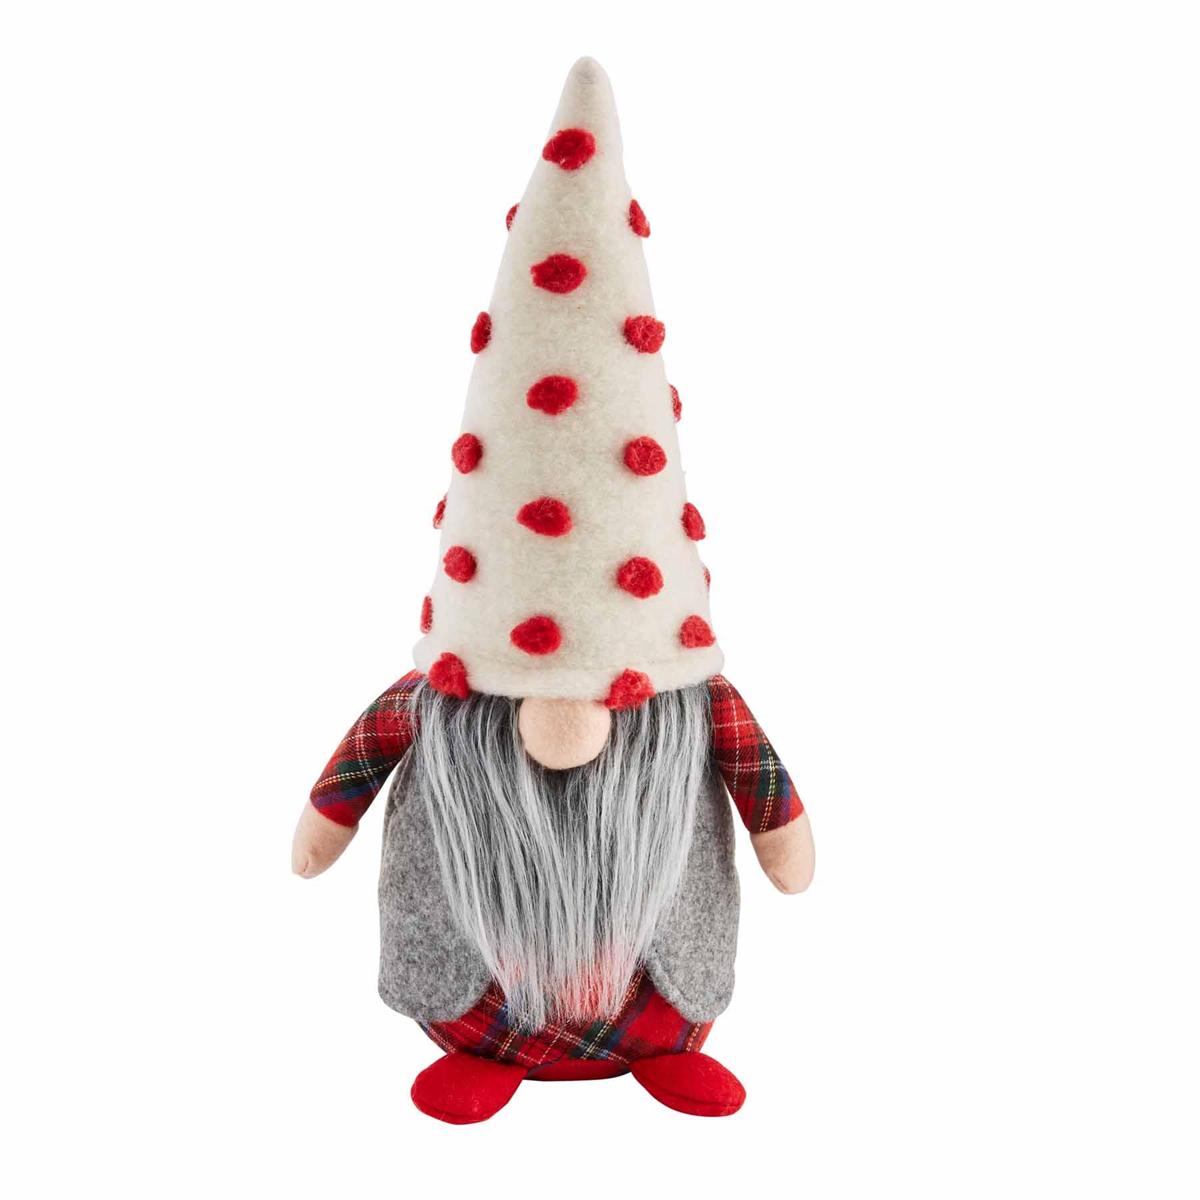 A Medium size Christmas Gnome Sitter from Mud Pie.